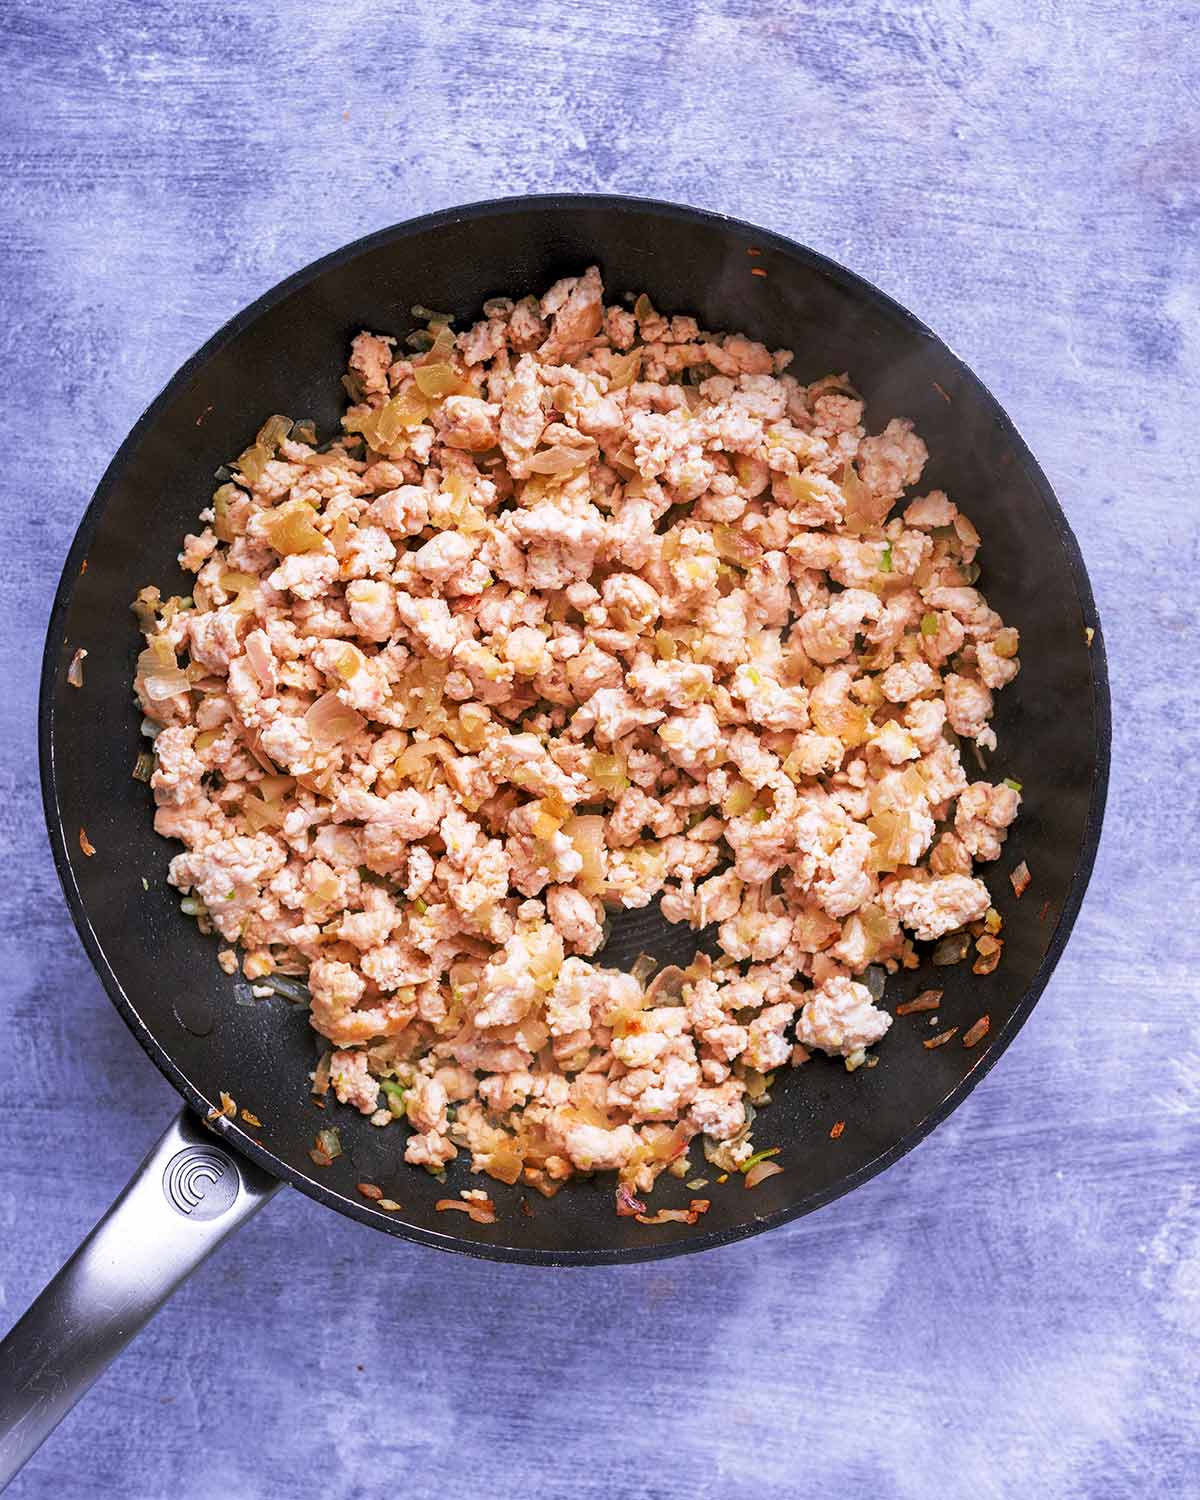 A frying pan with ground chicken cooking in it.